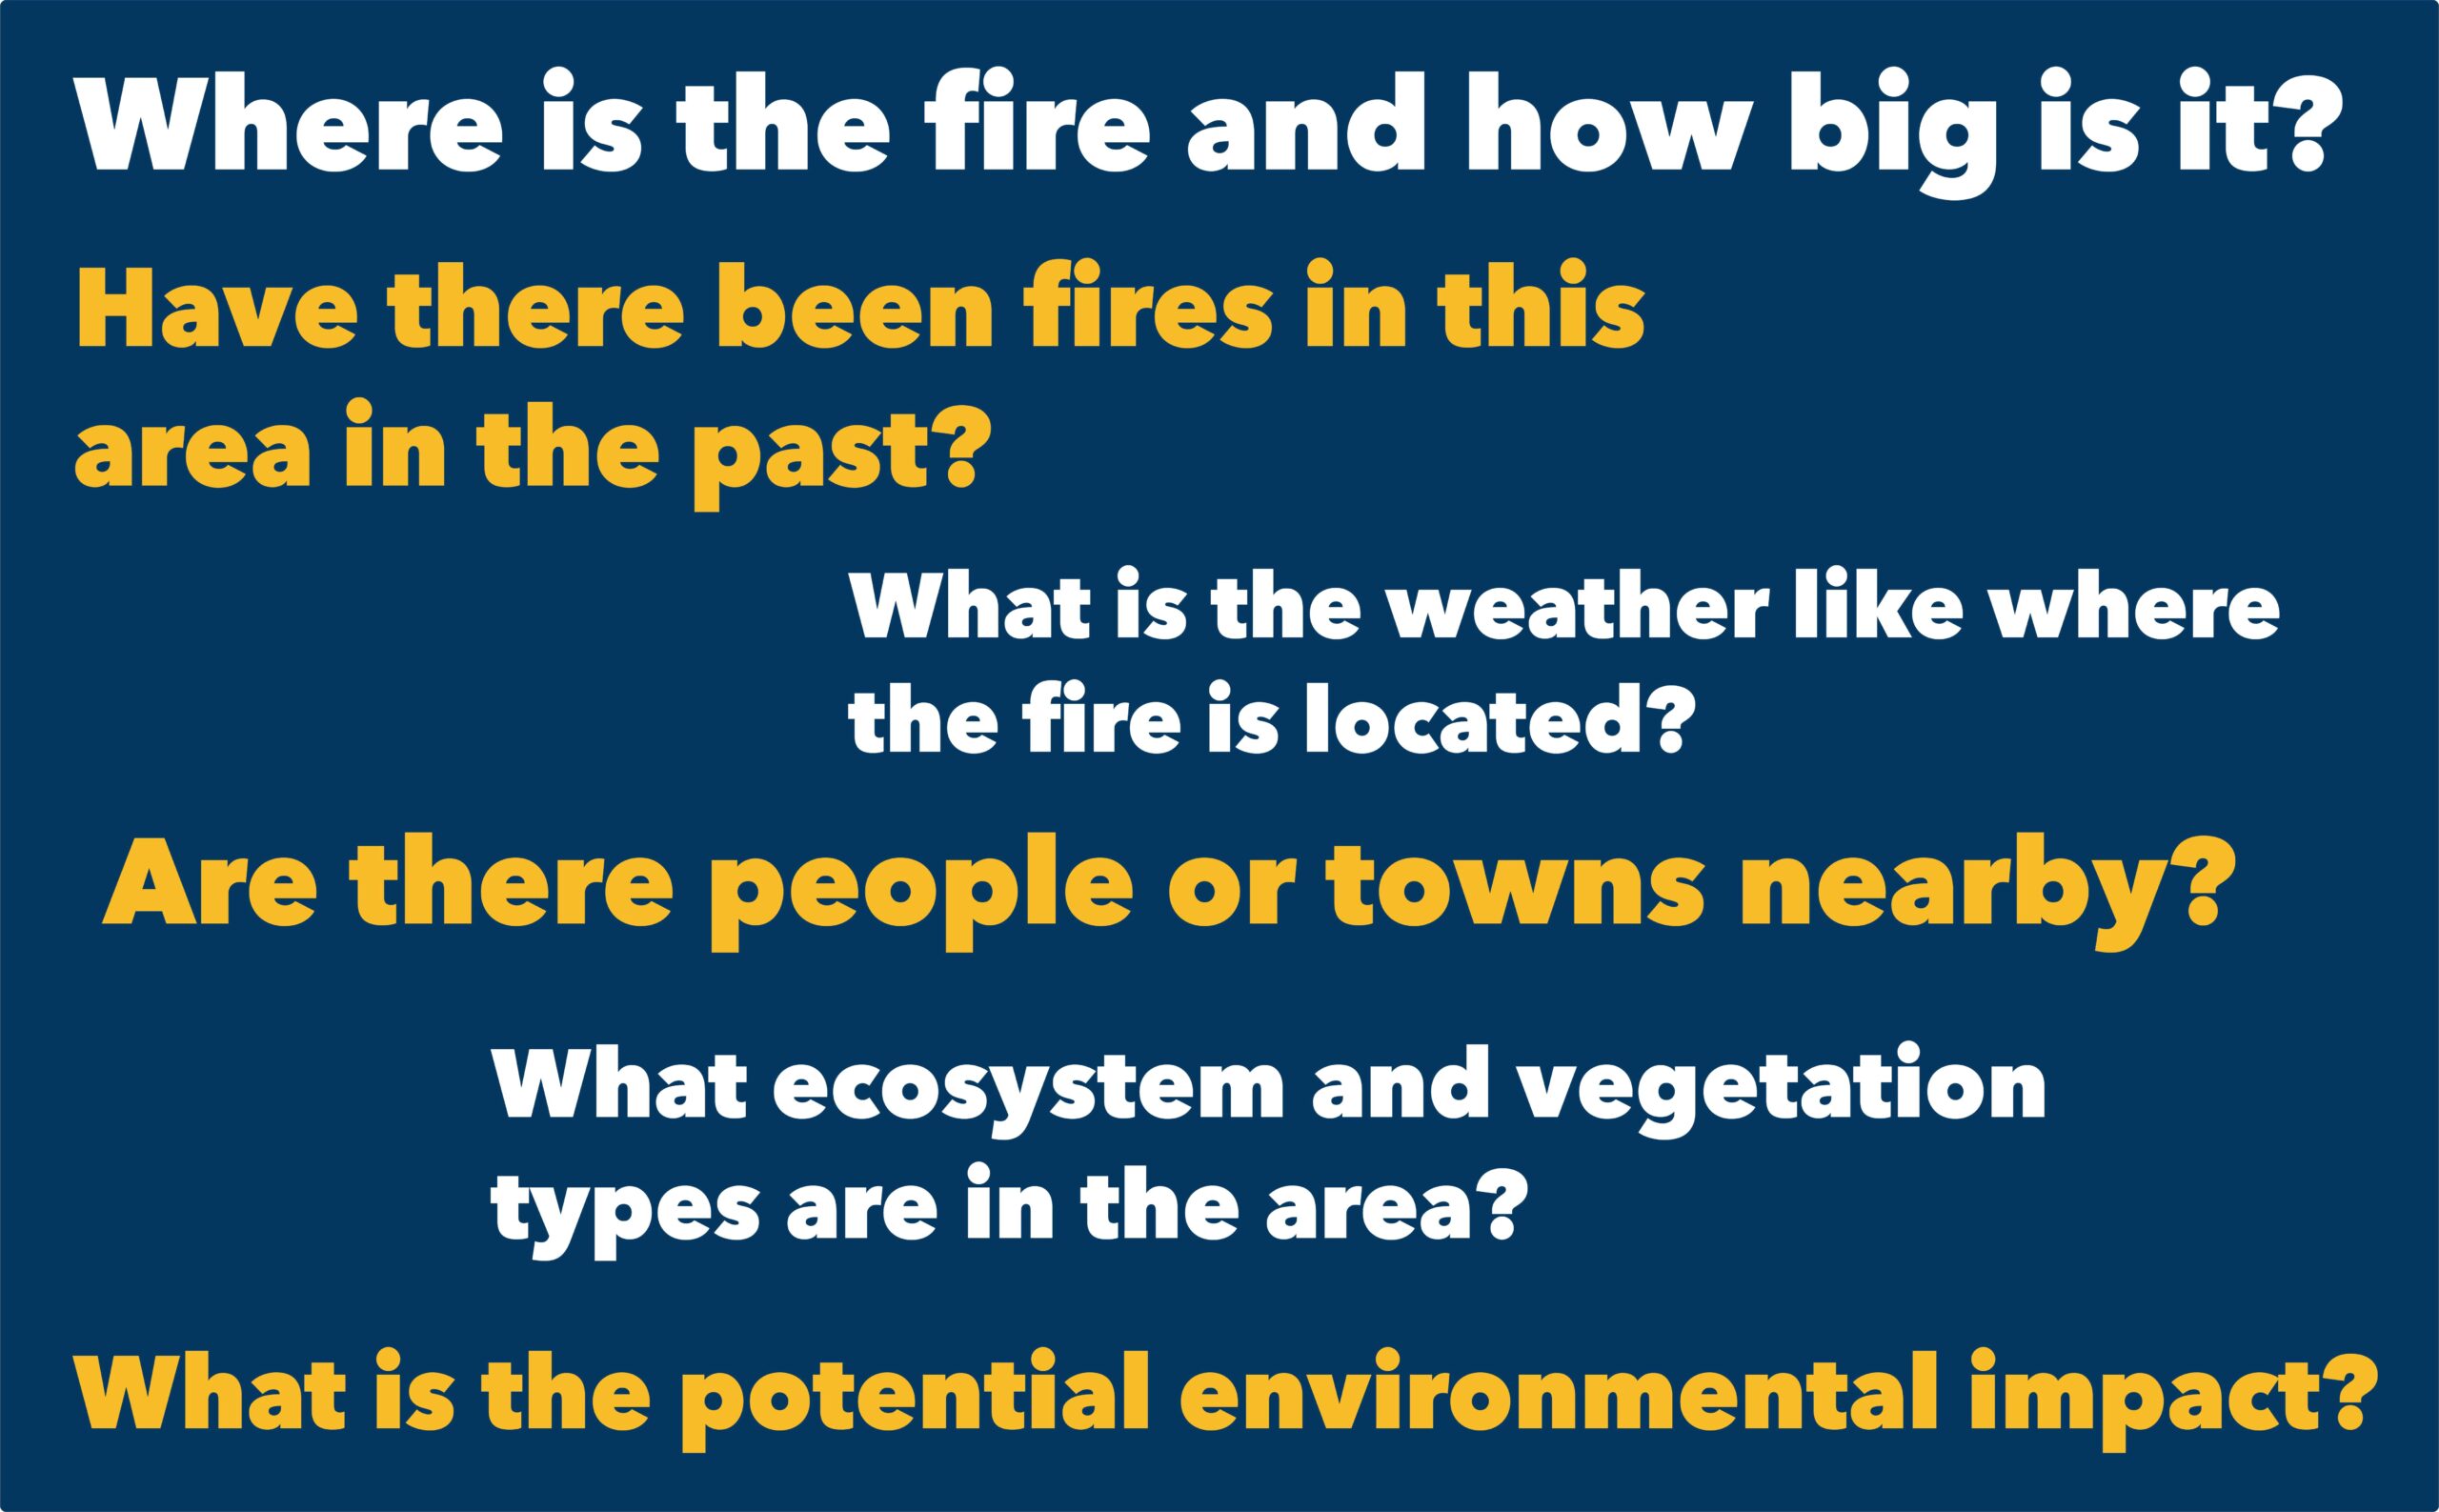 Typical questions related to wildfire information needs.